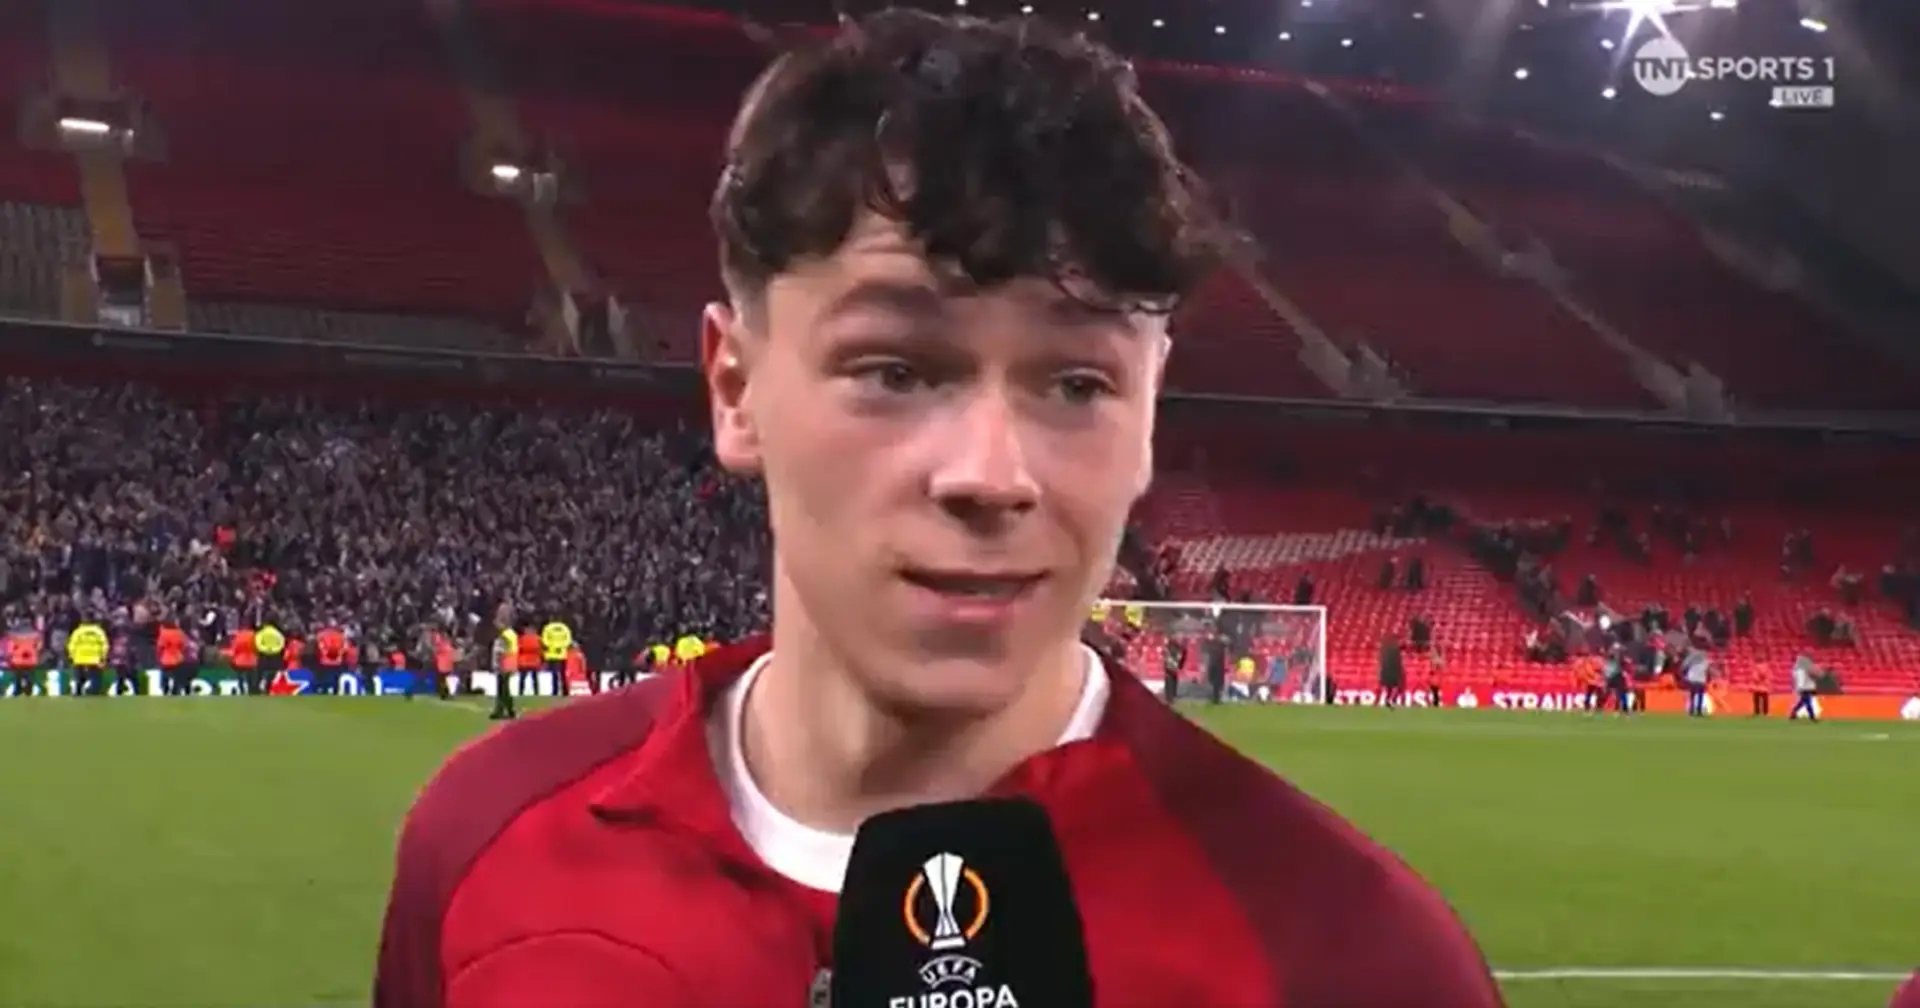 'I’ve dreamt of this moment since I was six': Luke Chambers reacts to full Liverpool debut